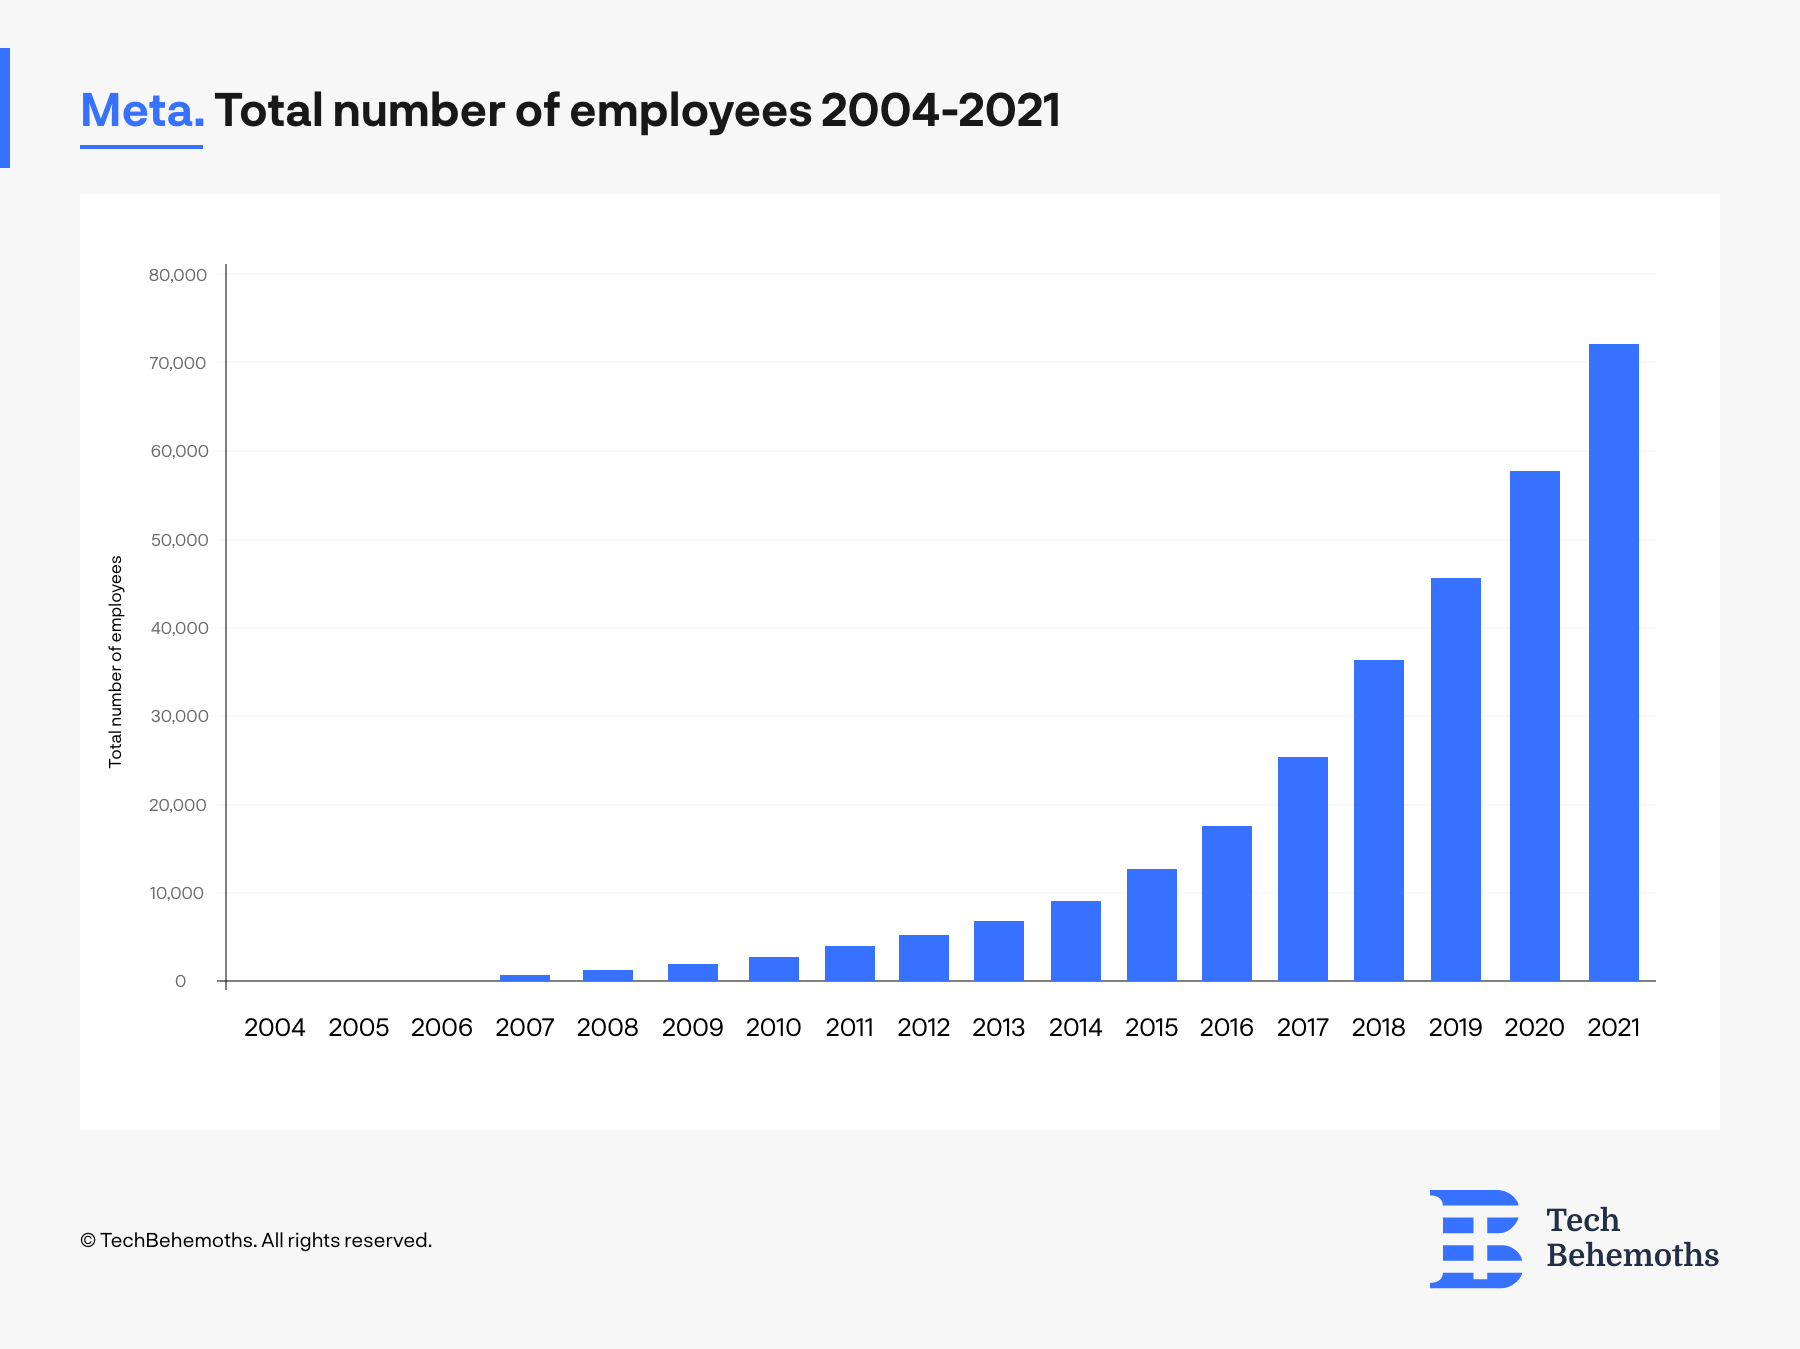 The number of employees at Meta between 2004-2021